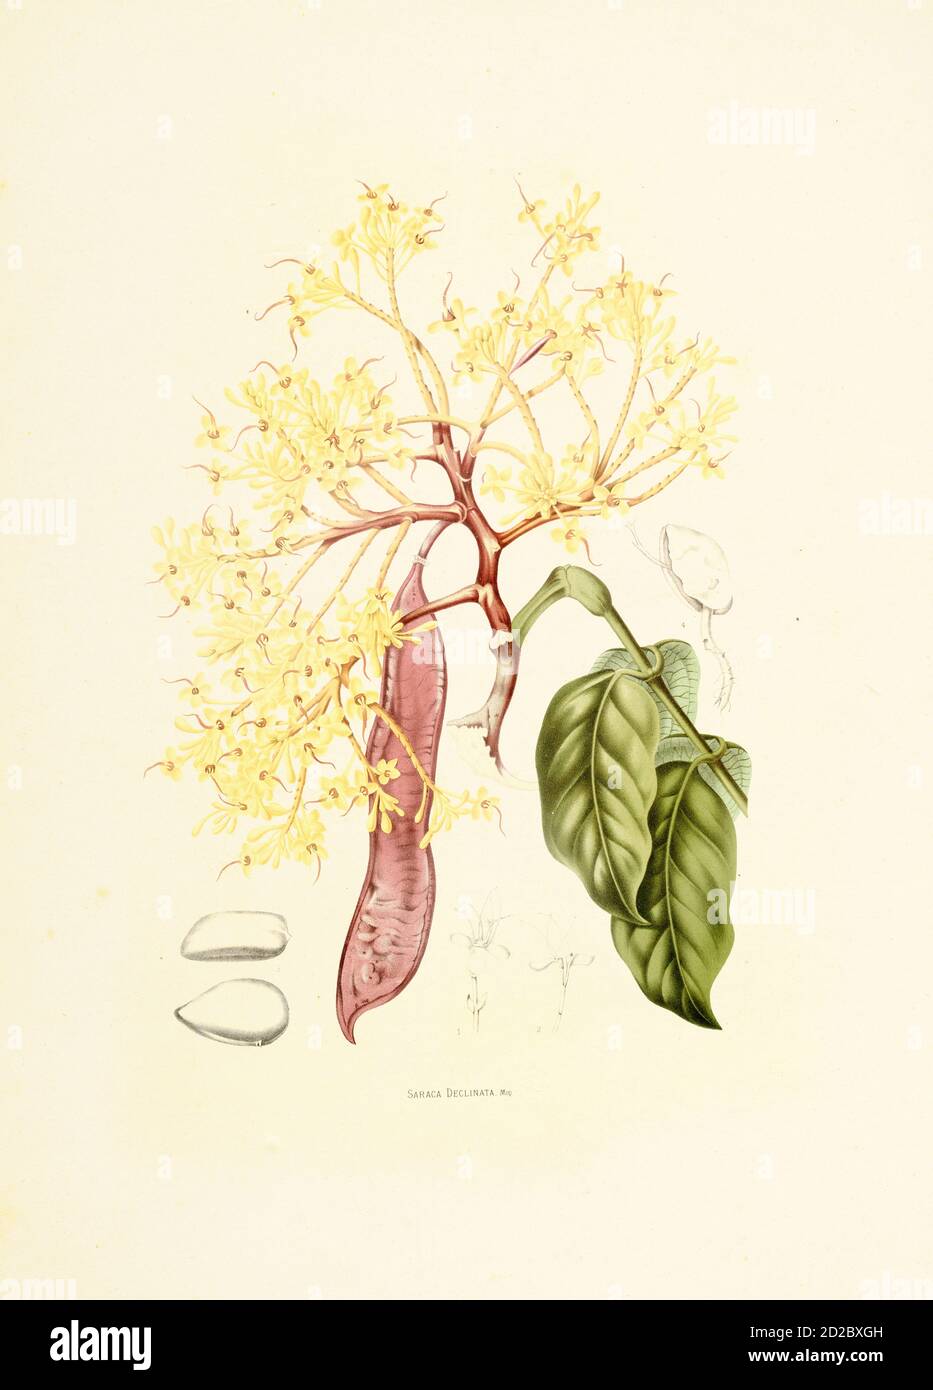 Antique 19th-century engraving of a saraca declinata, also known as red saraca. Illustration by Berthe Hoola van Nooten from the book Fleurs, Fruits e Stock Photo